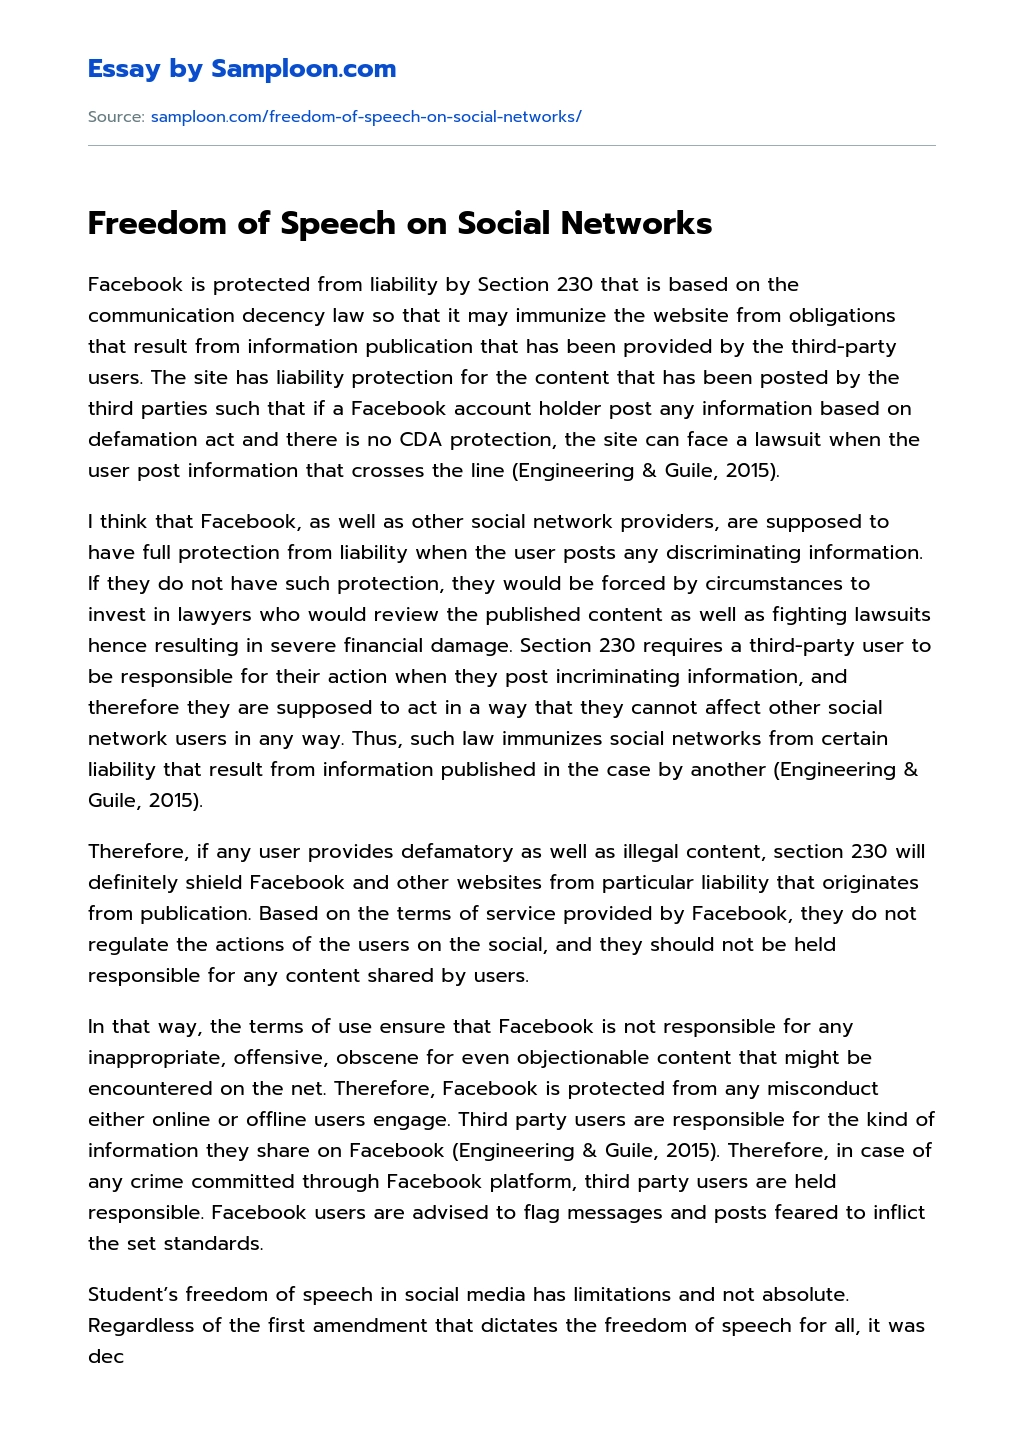 essay on freedom of speech and expression and social media